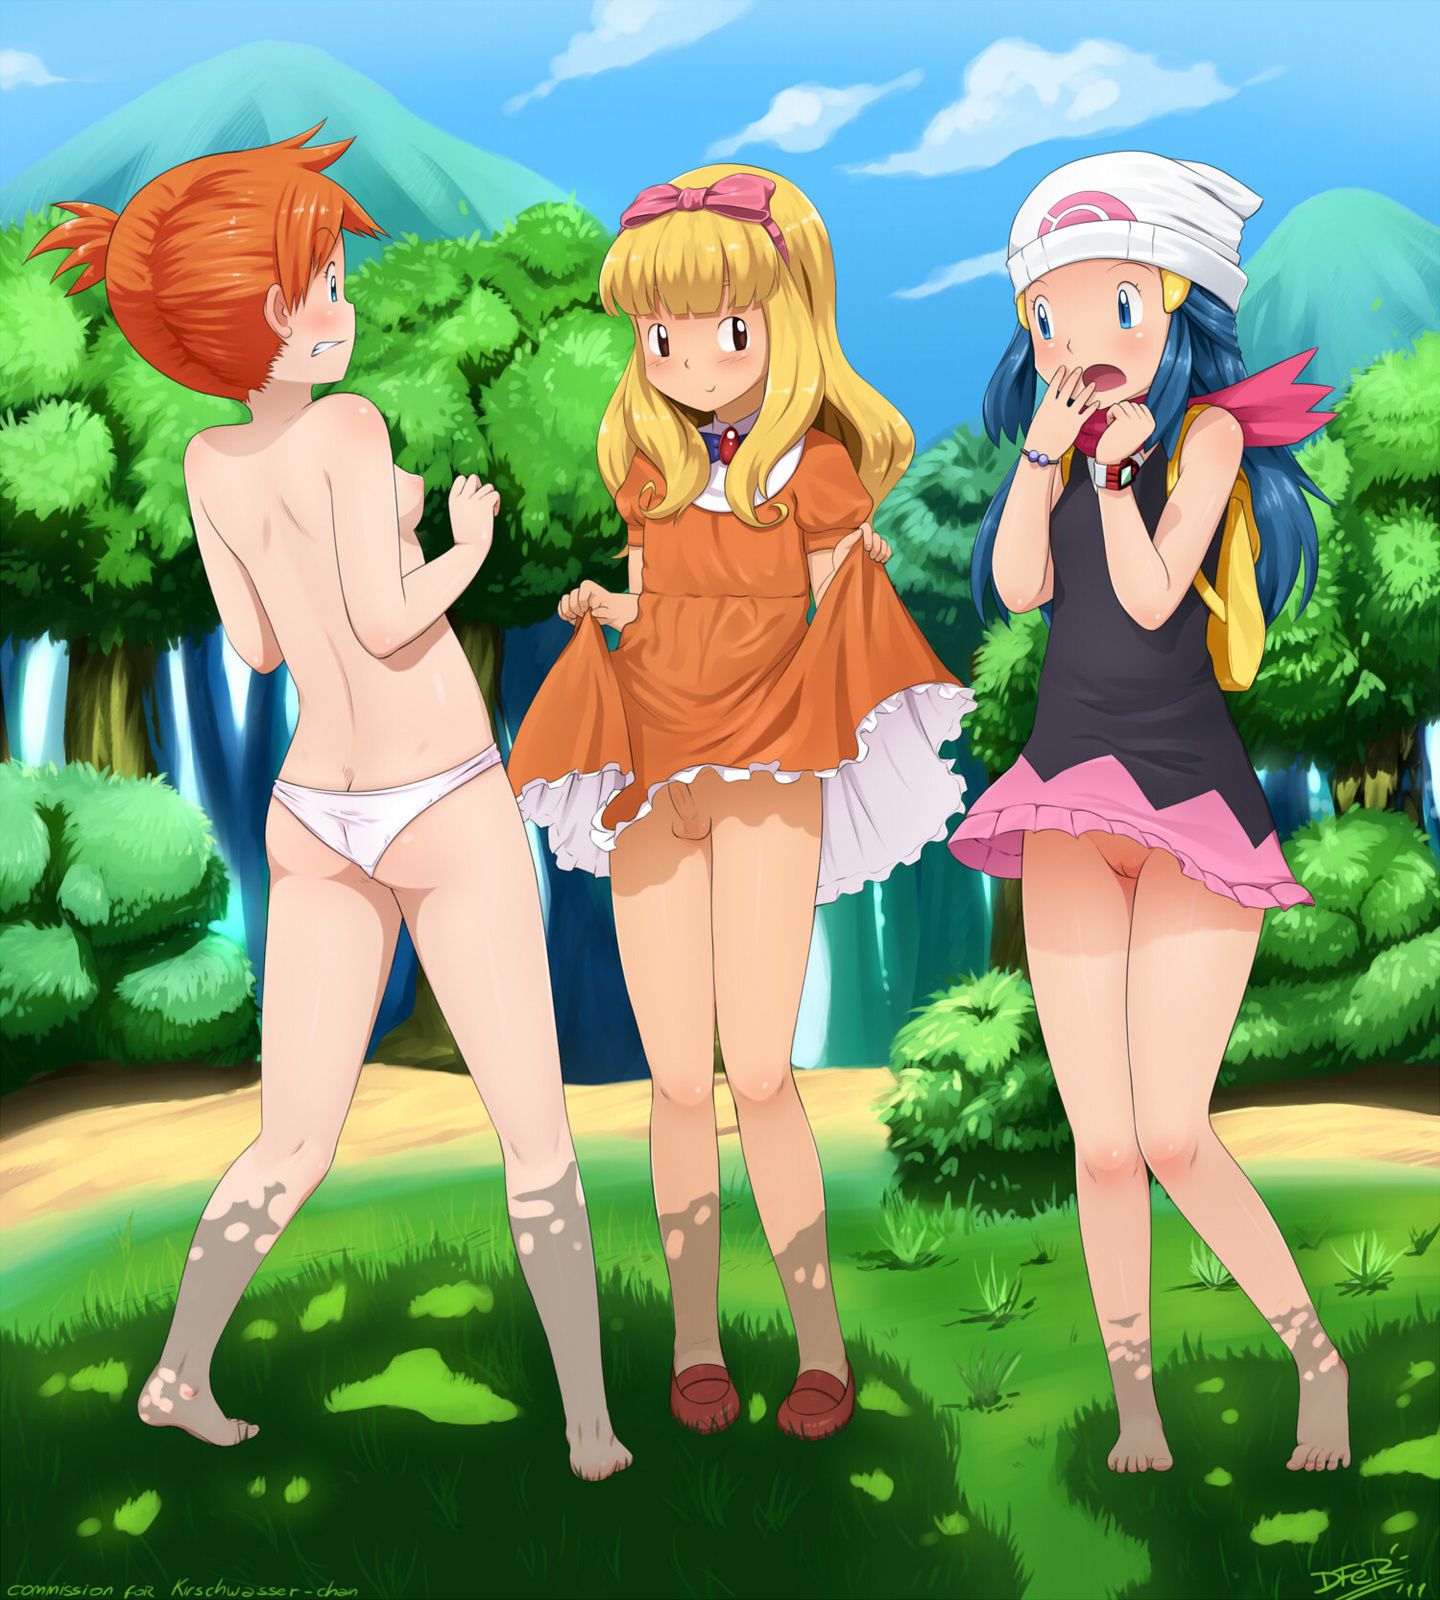 【Pocket Monsters】Cute erotic image summary that comes through with Hikari's echi 15